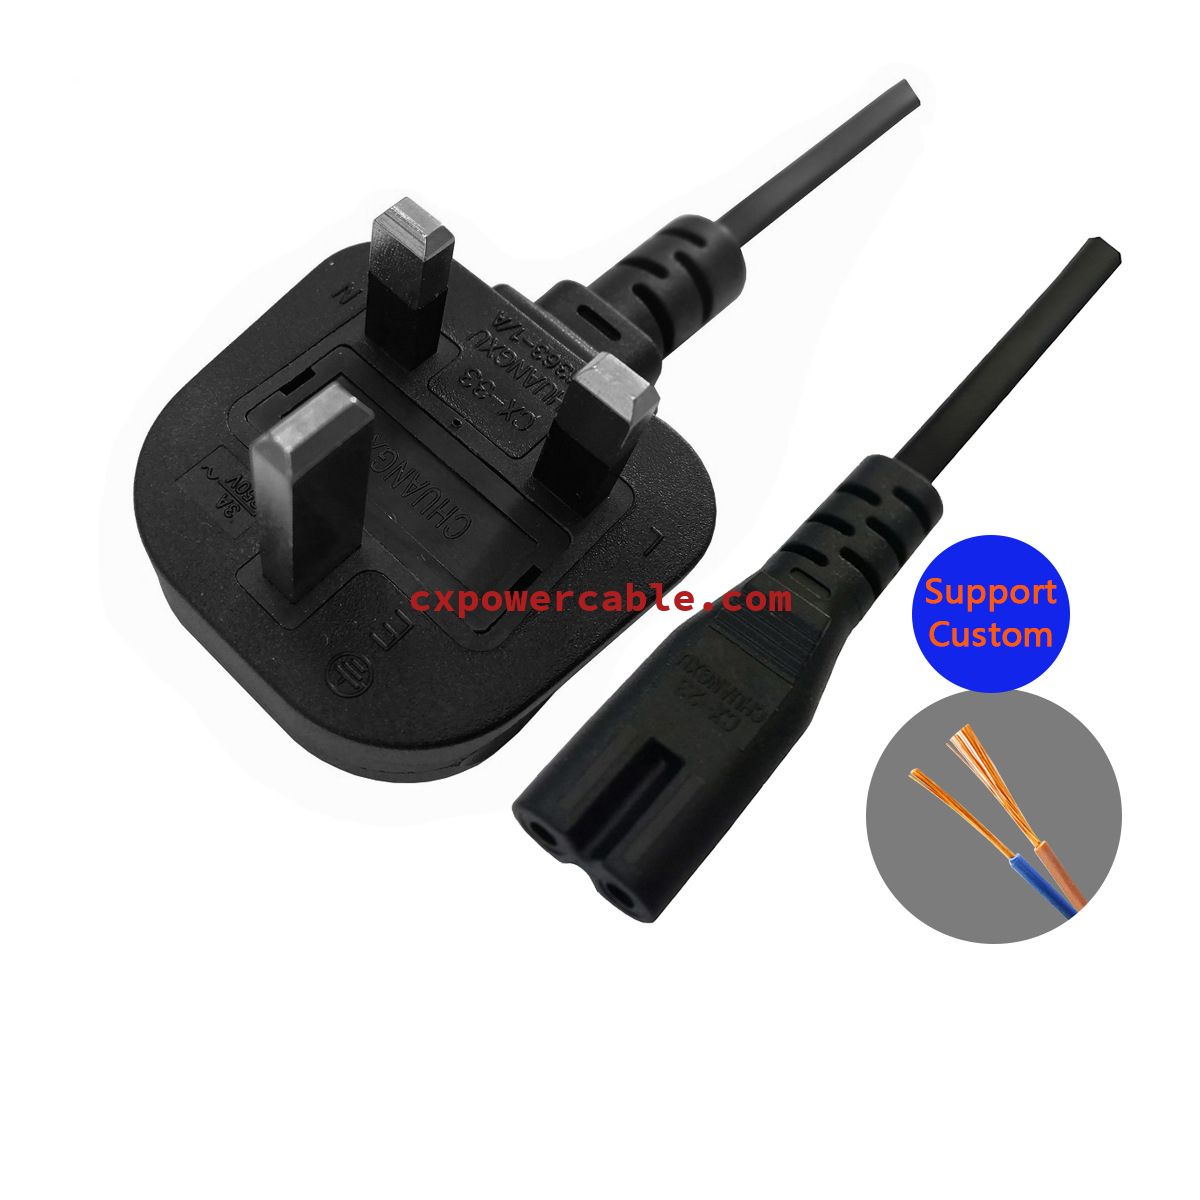 UK style 3pin plug BS certified + 3pin tail plug power cable